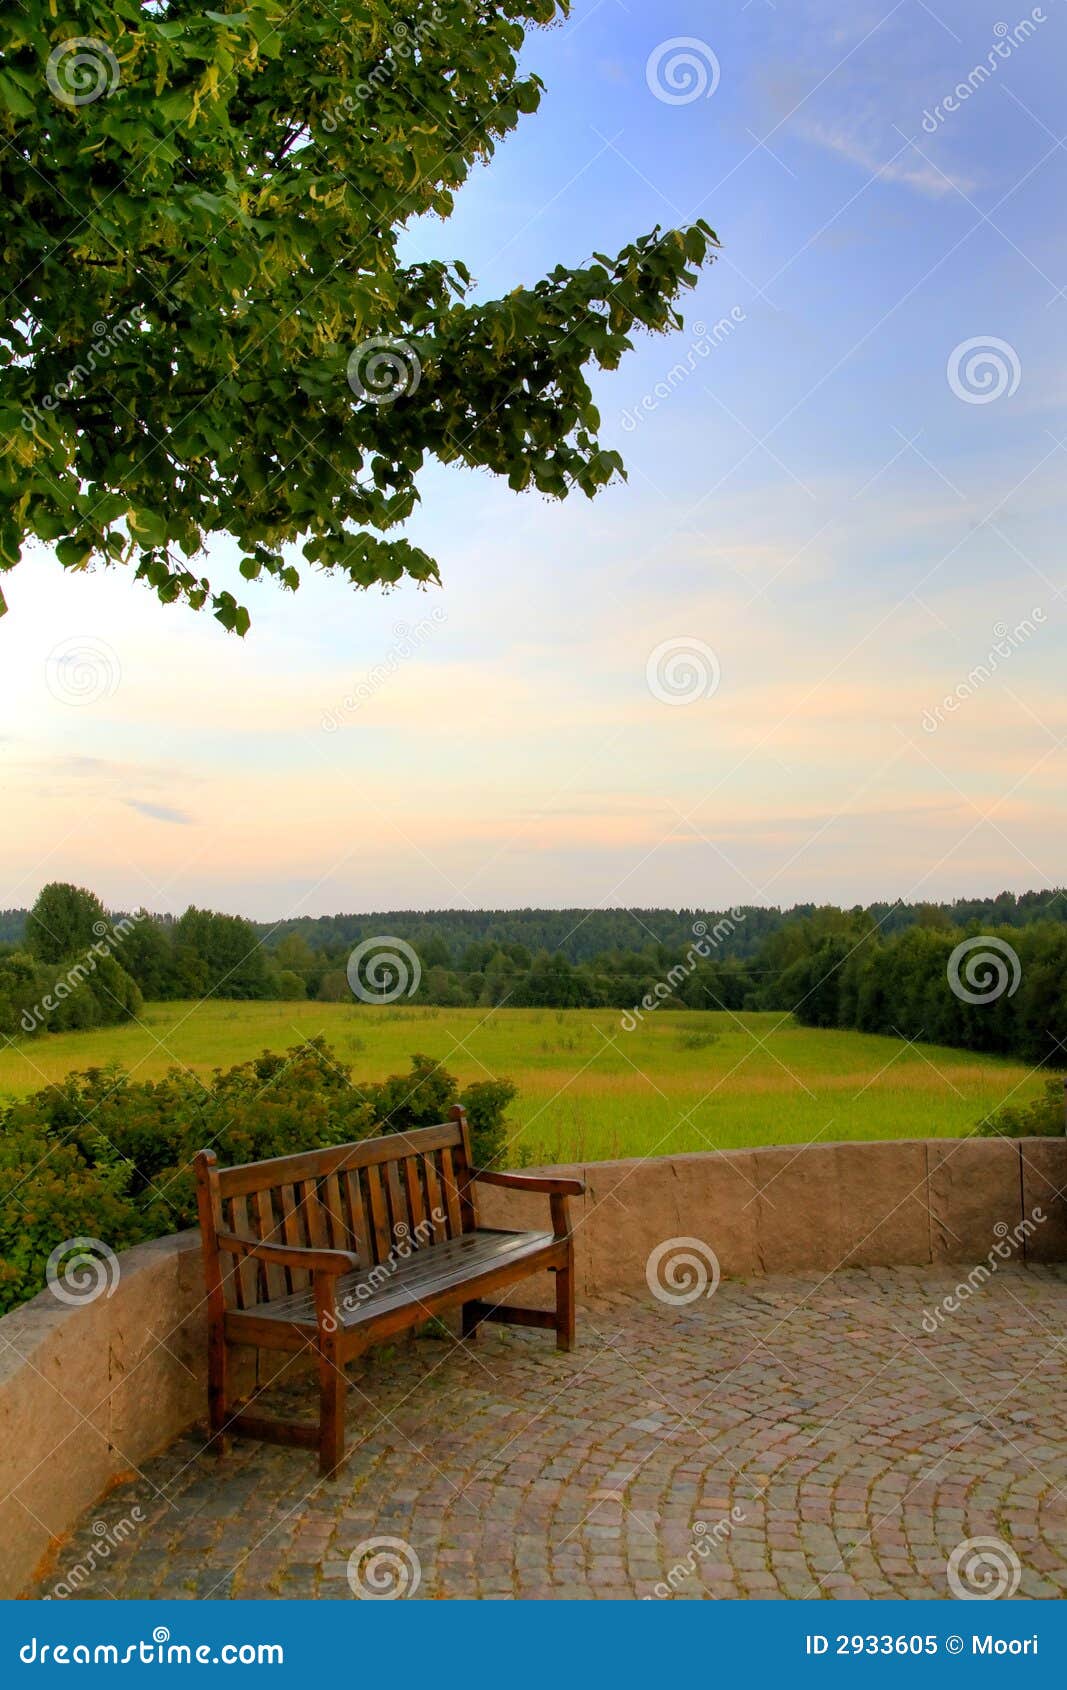 1,301 Parkbench Stock Photos - Free & Royalty-Free Stock Photos from  Dreamstime